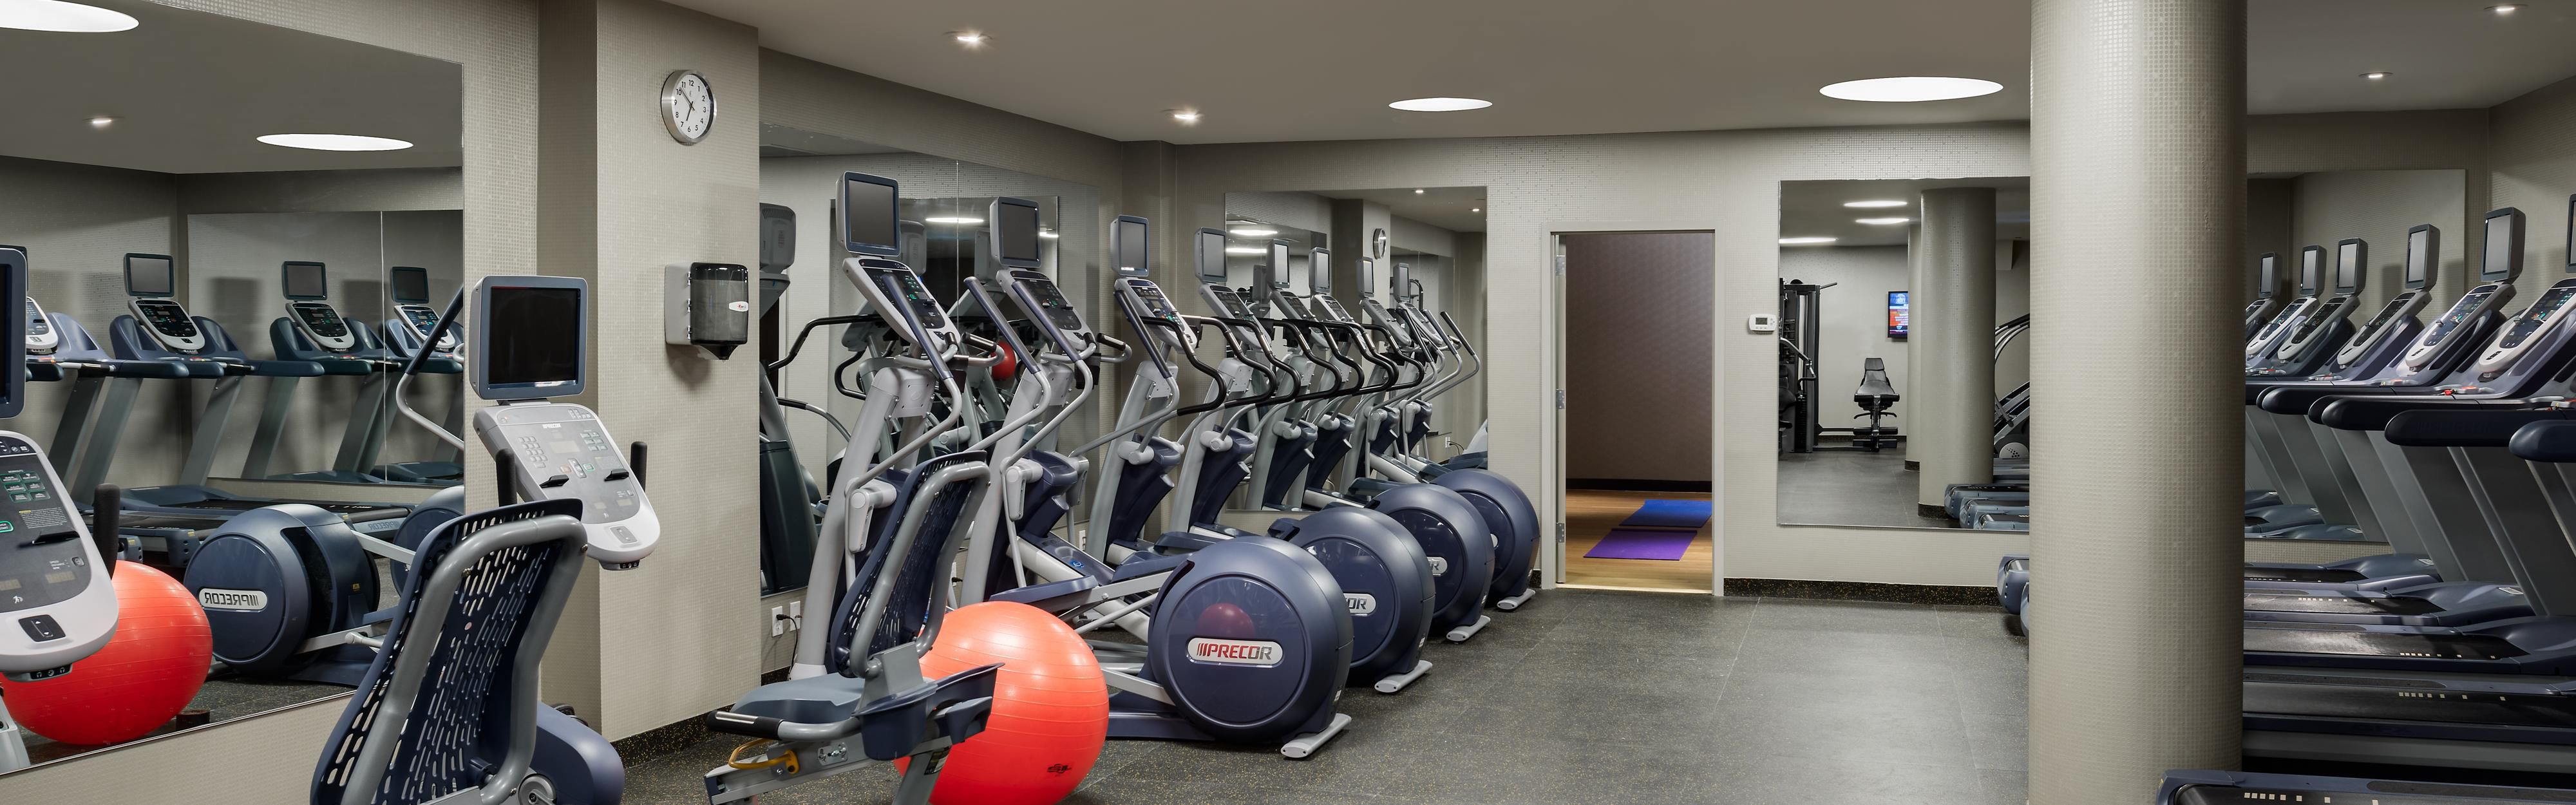 Our fitness center offers cardio equipment, free weights & bikes,